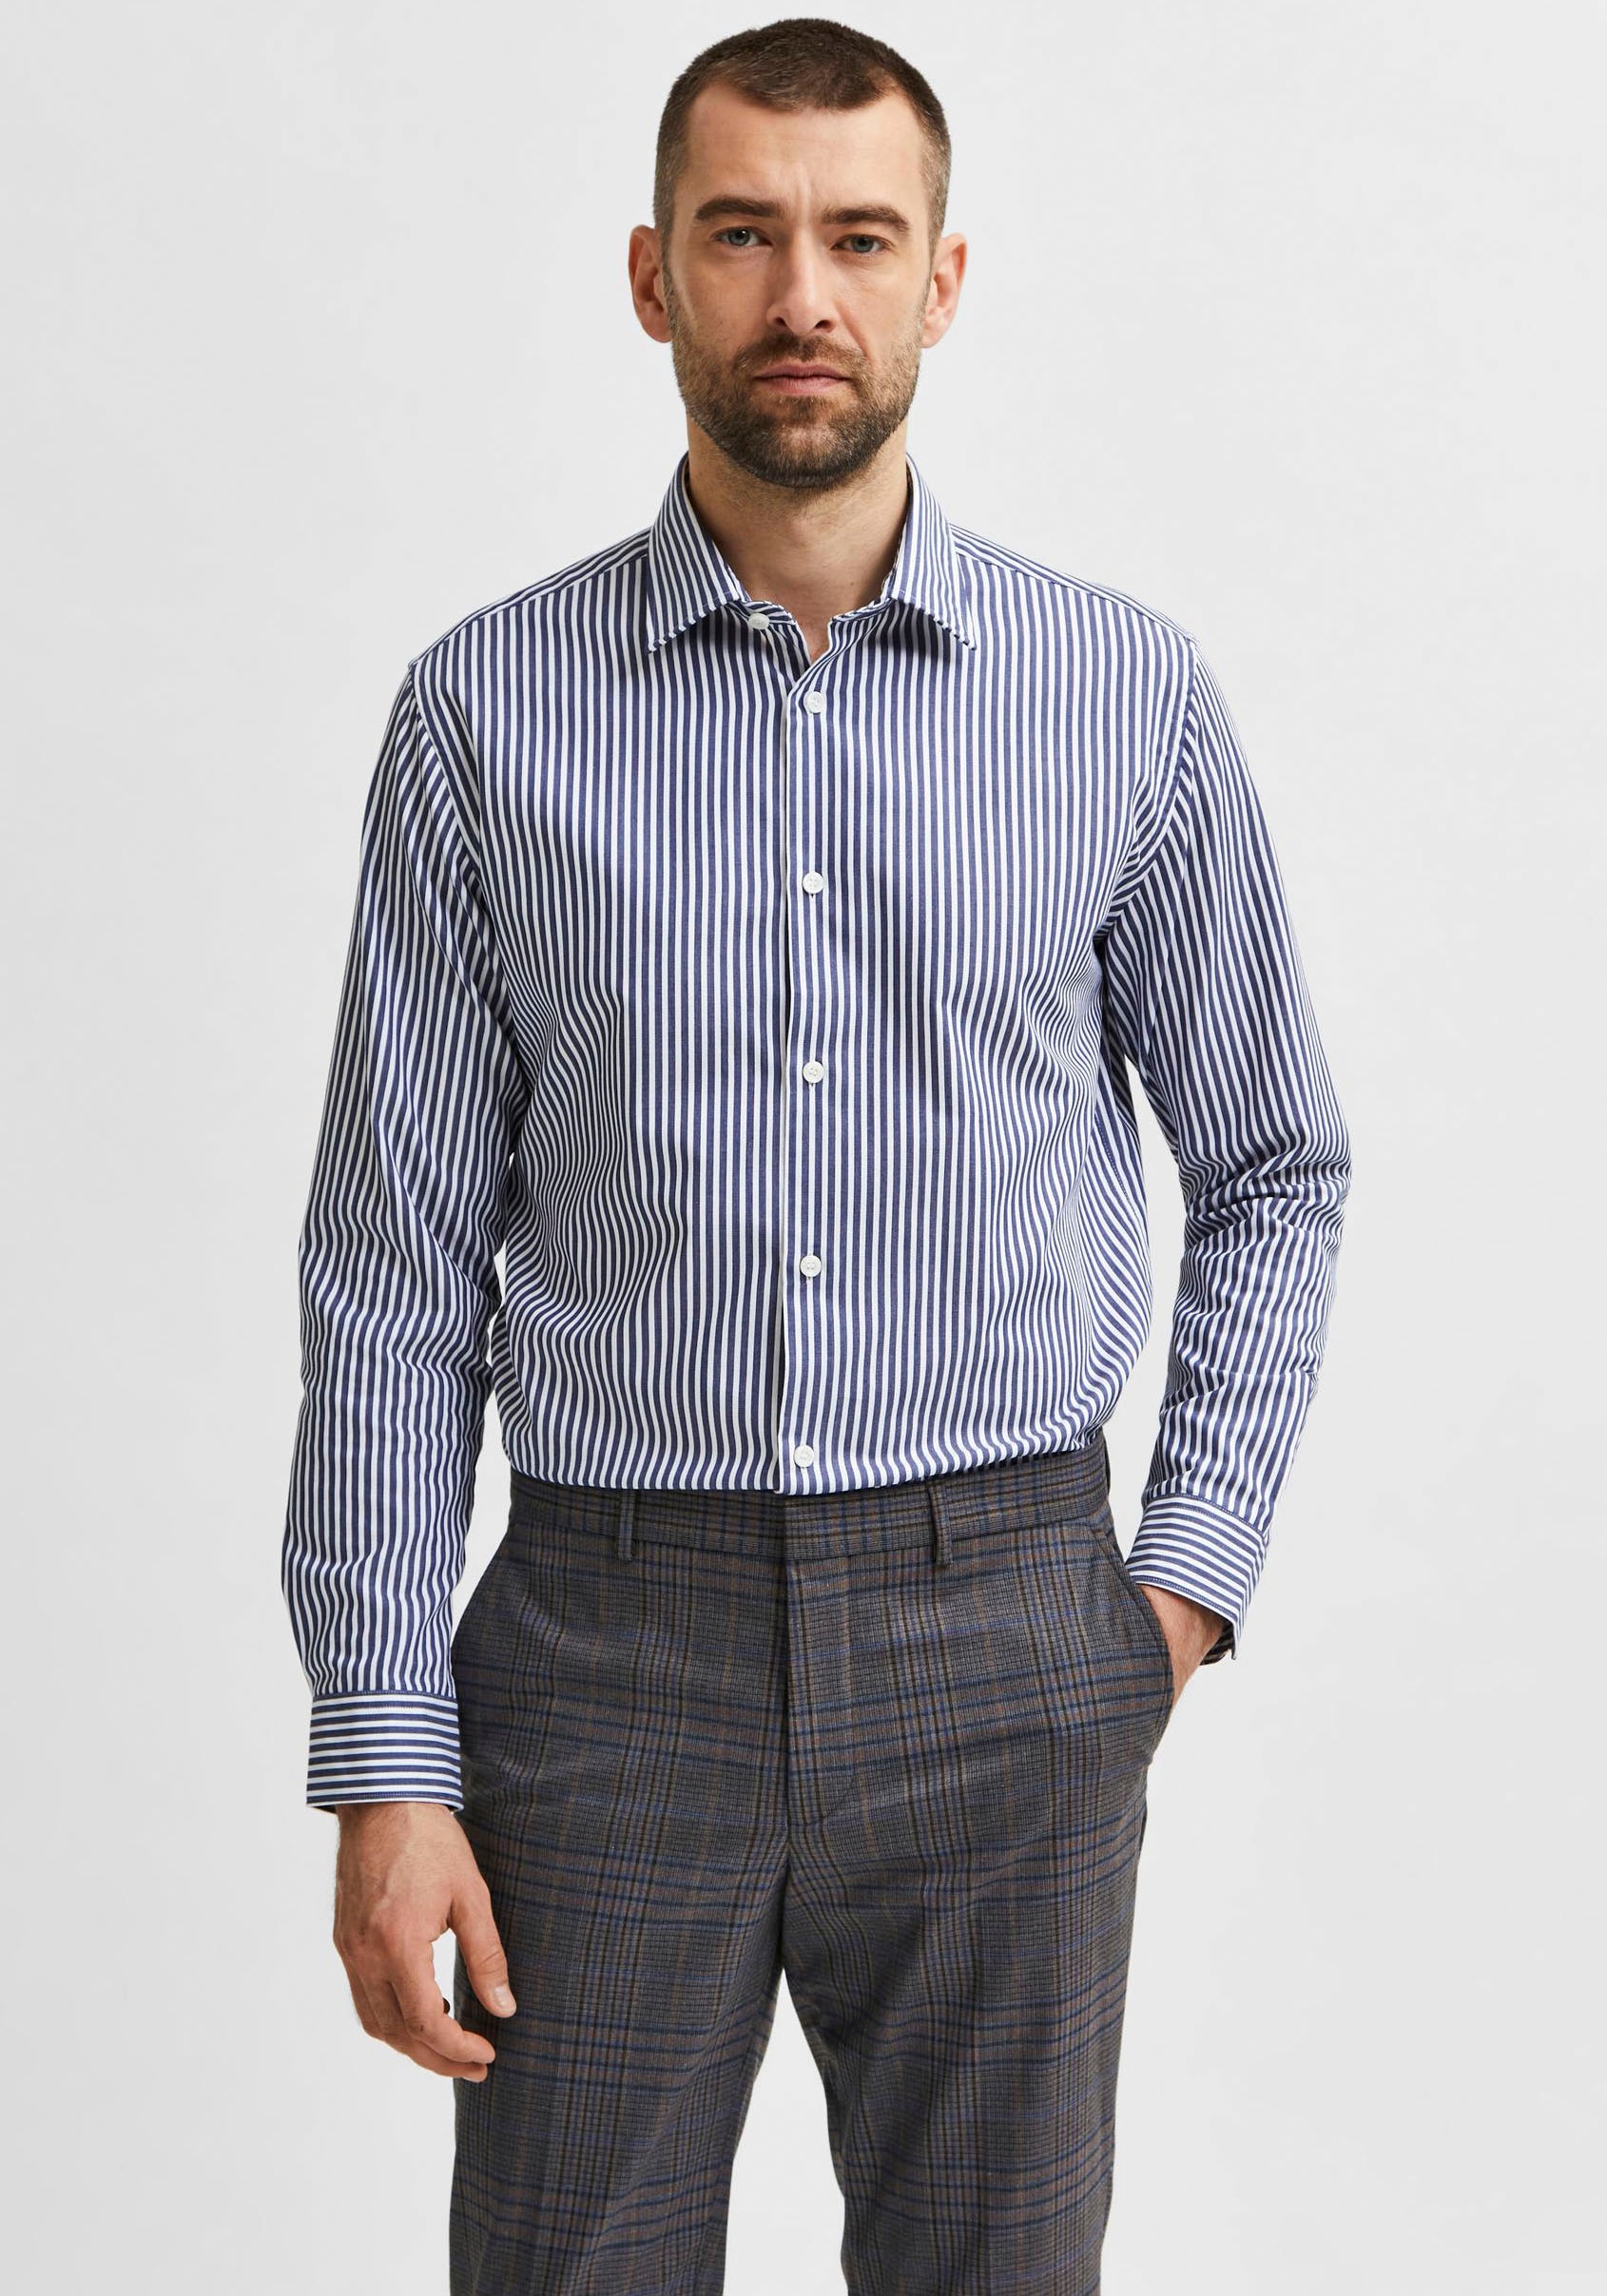 HOMME »SLHSLIMETHAN Businesshemd SHIRT« kaufen SELECTED online OTTO bei